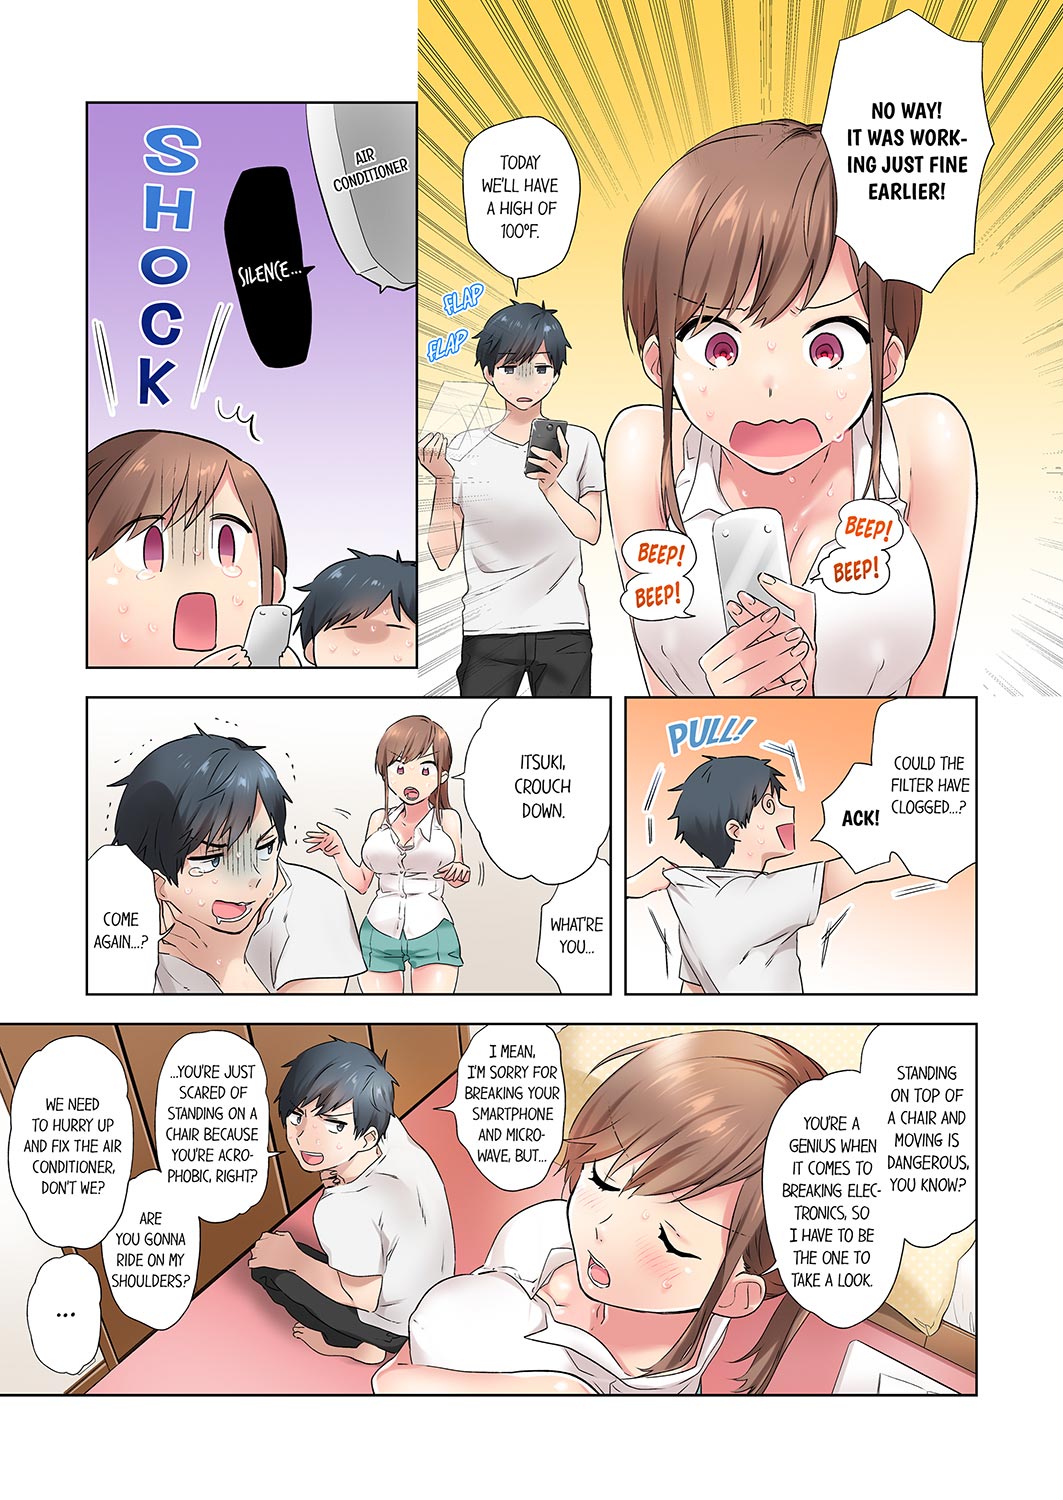 A Scorching Hot Day with A Broken Air Conditioner. If I Keep Having Sex with My Sweaty Childhood Friend… - Chapter 1 Page 5